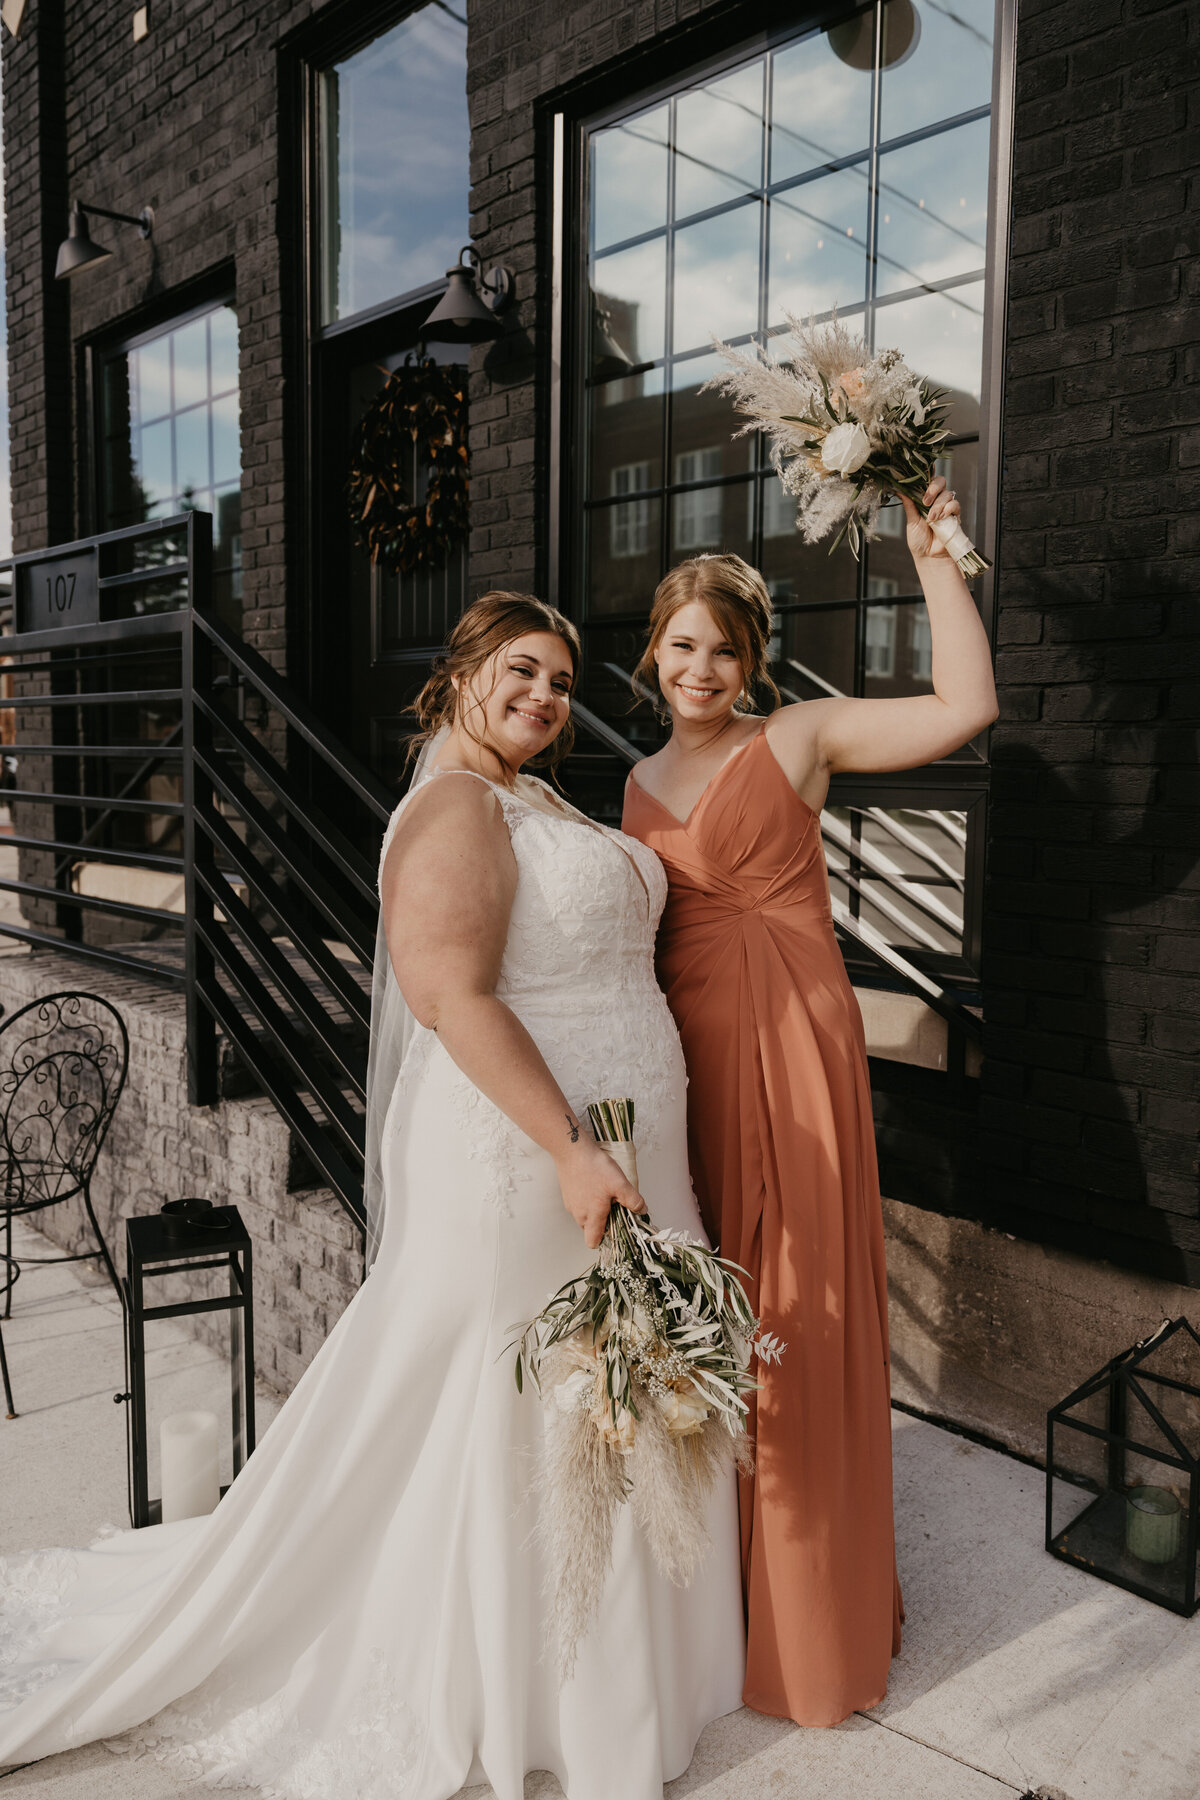 Bride and Maid of Honor's formal photo.